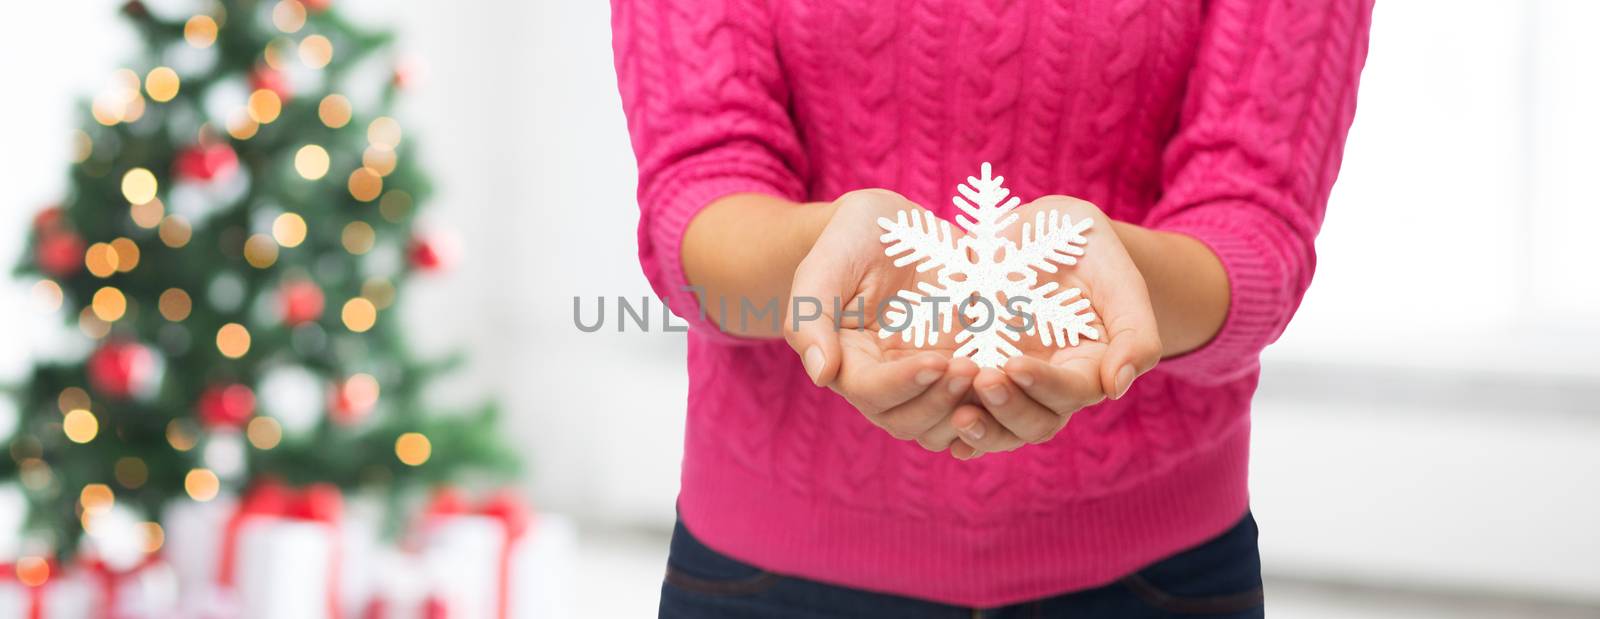 winter, holidays and people concept - close up of woman in pink sweater holding snowflake decoration over living room with christmas tree lights background